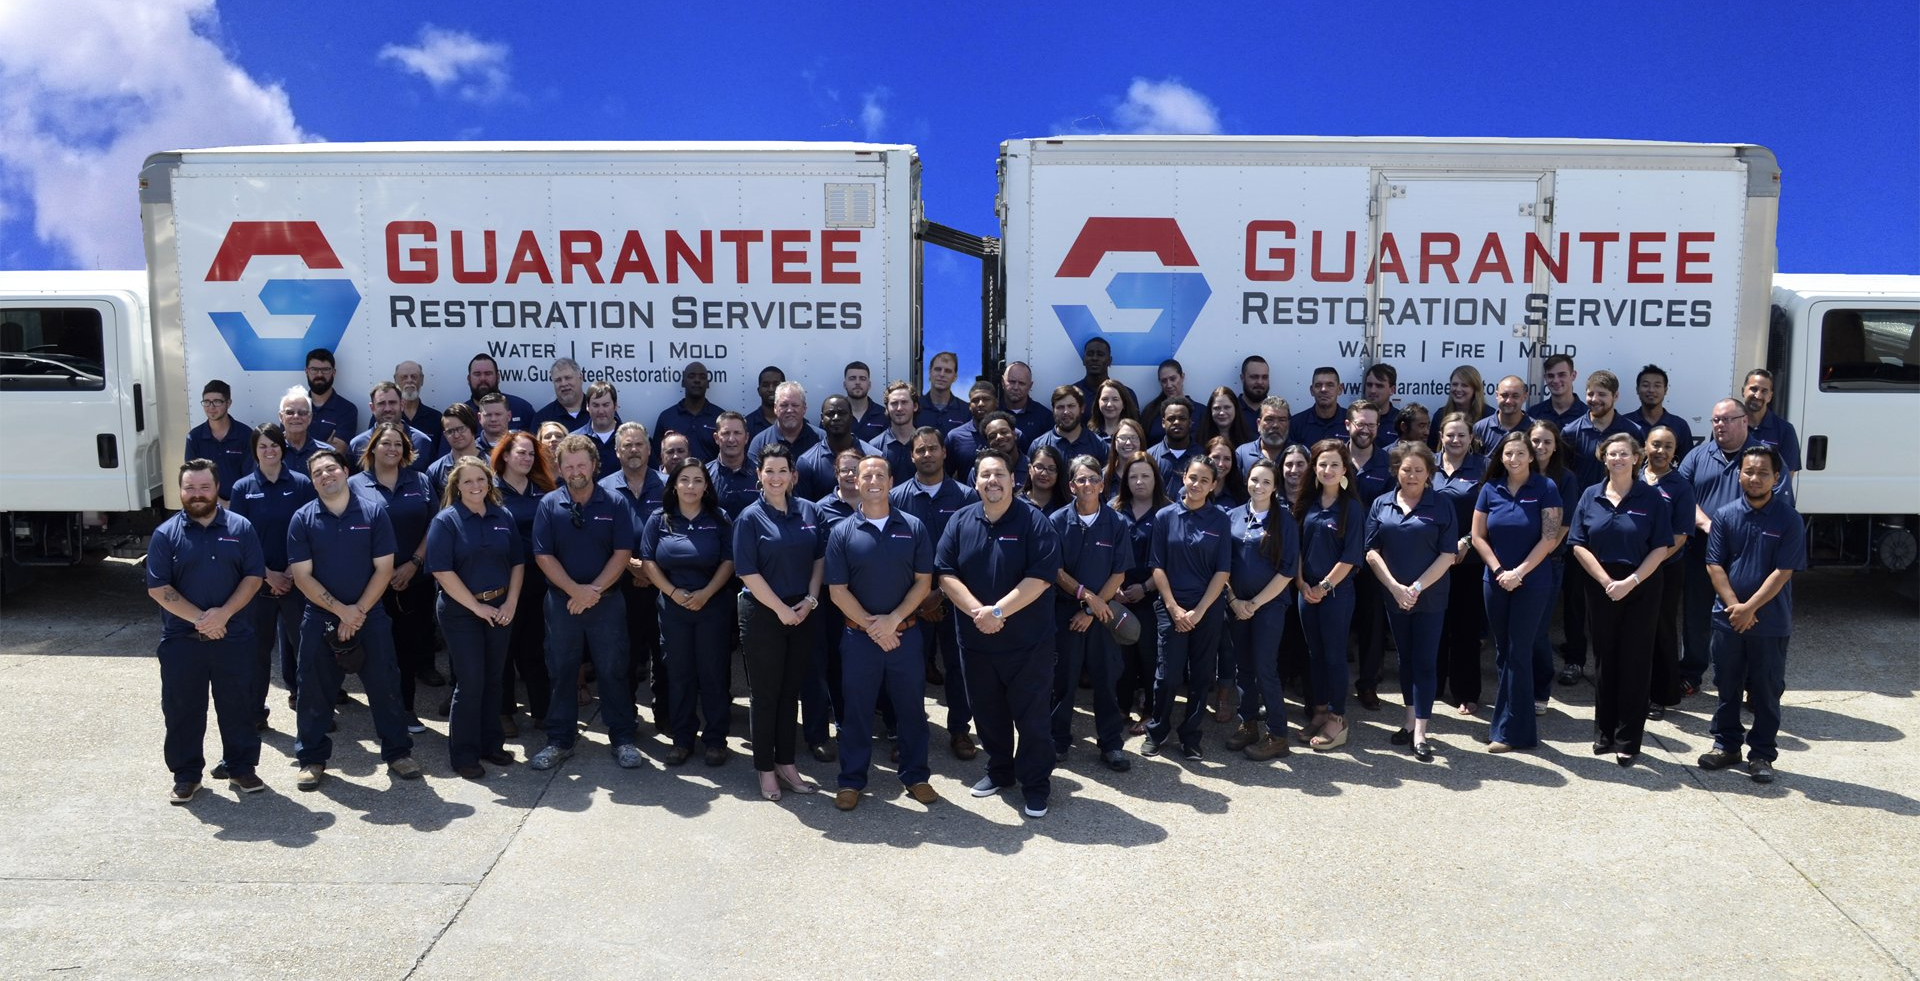 Your certified team at Guaranteed Restoration